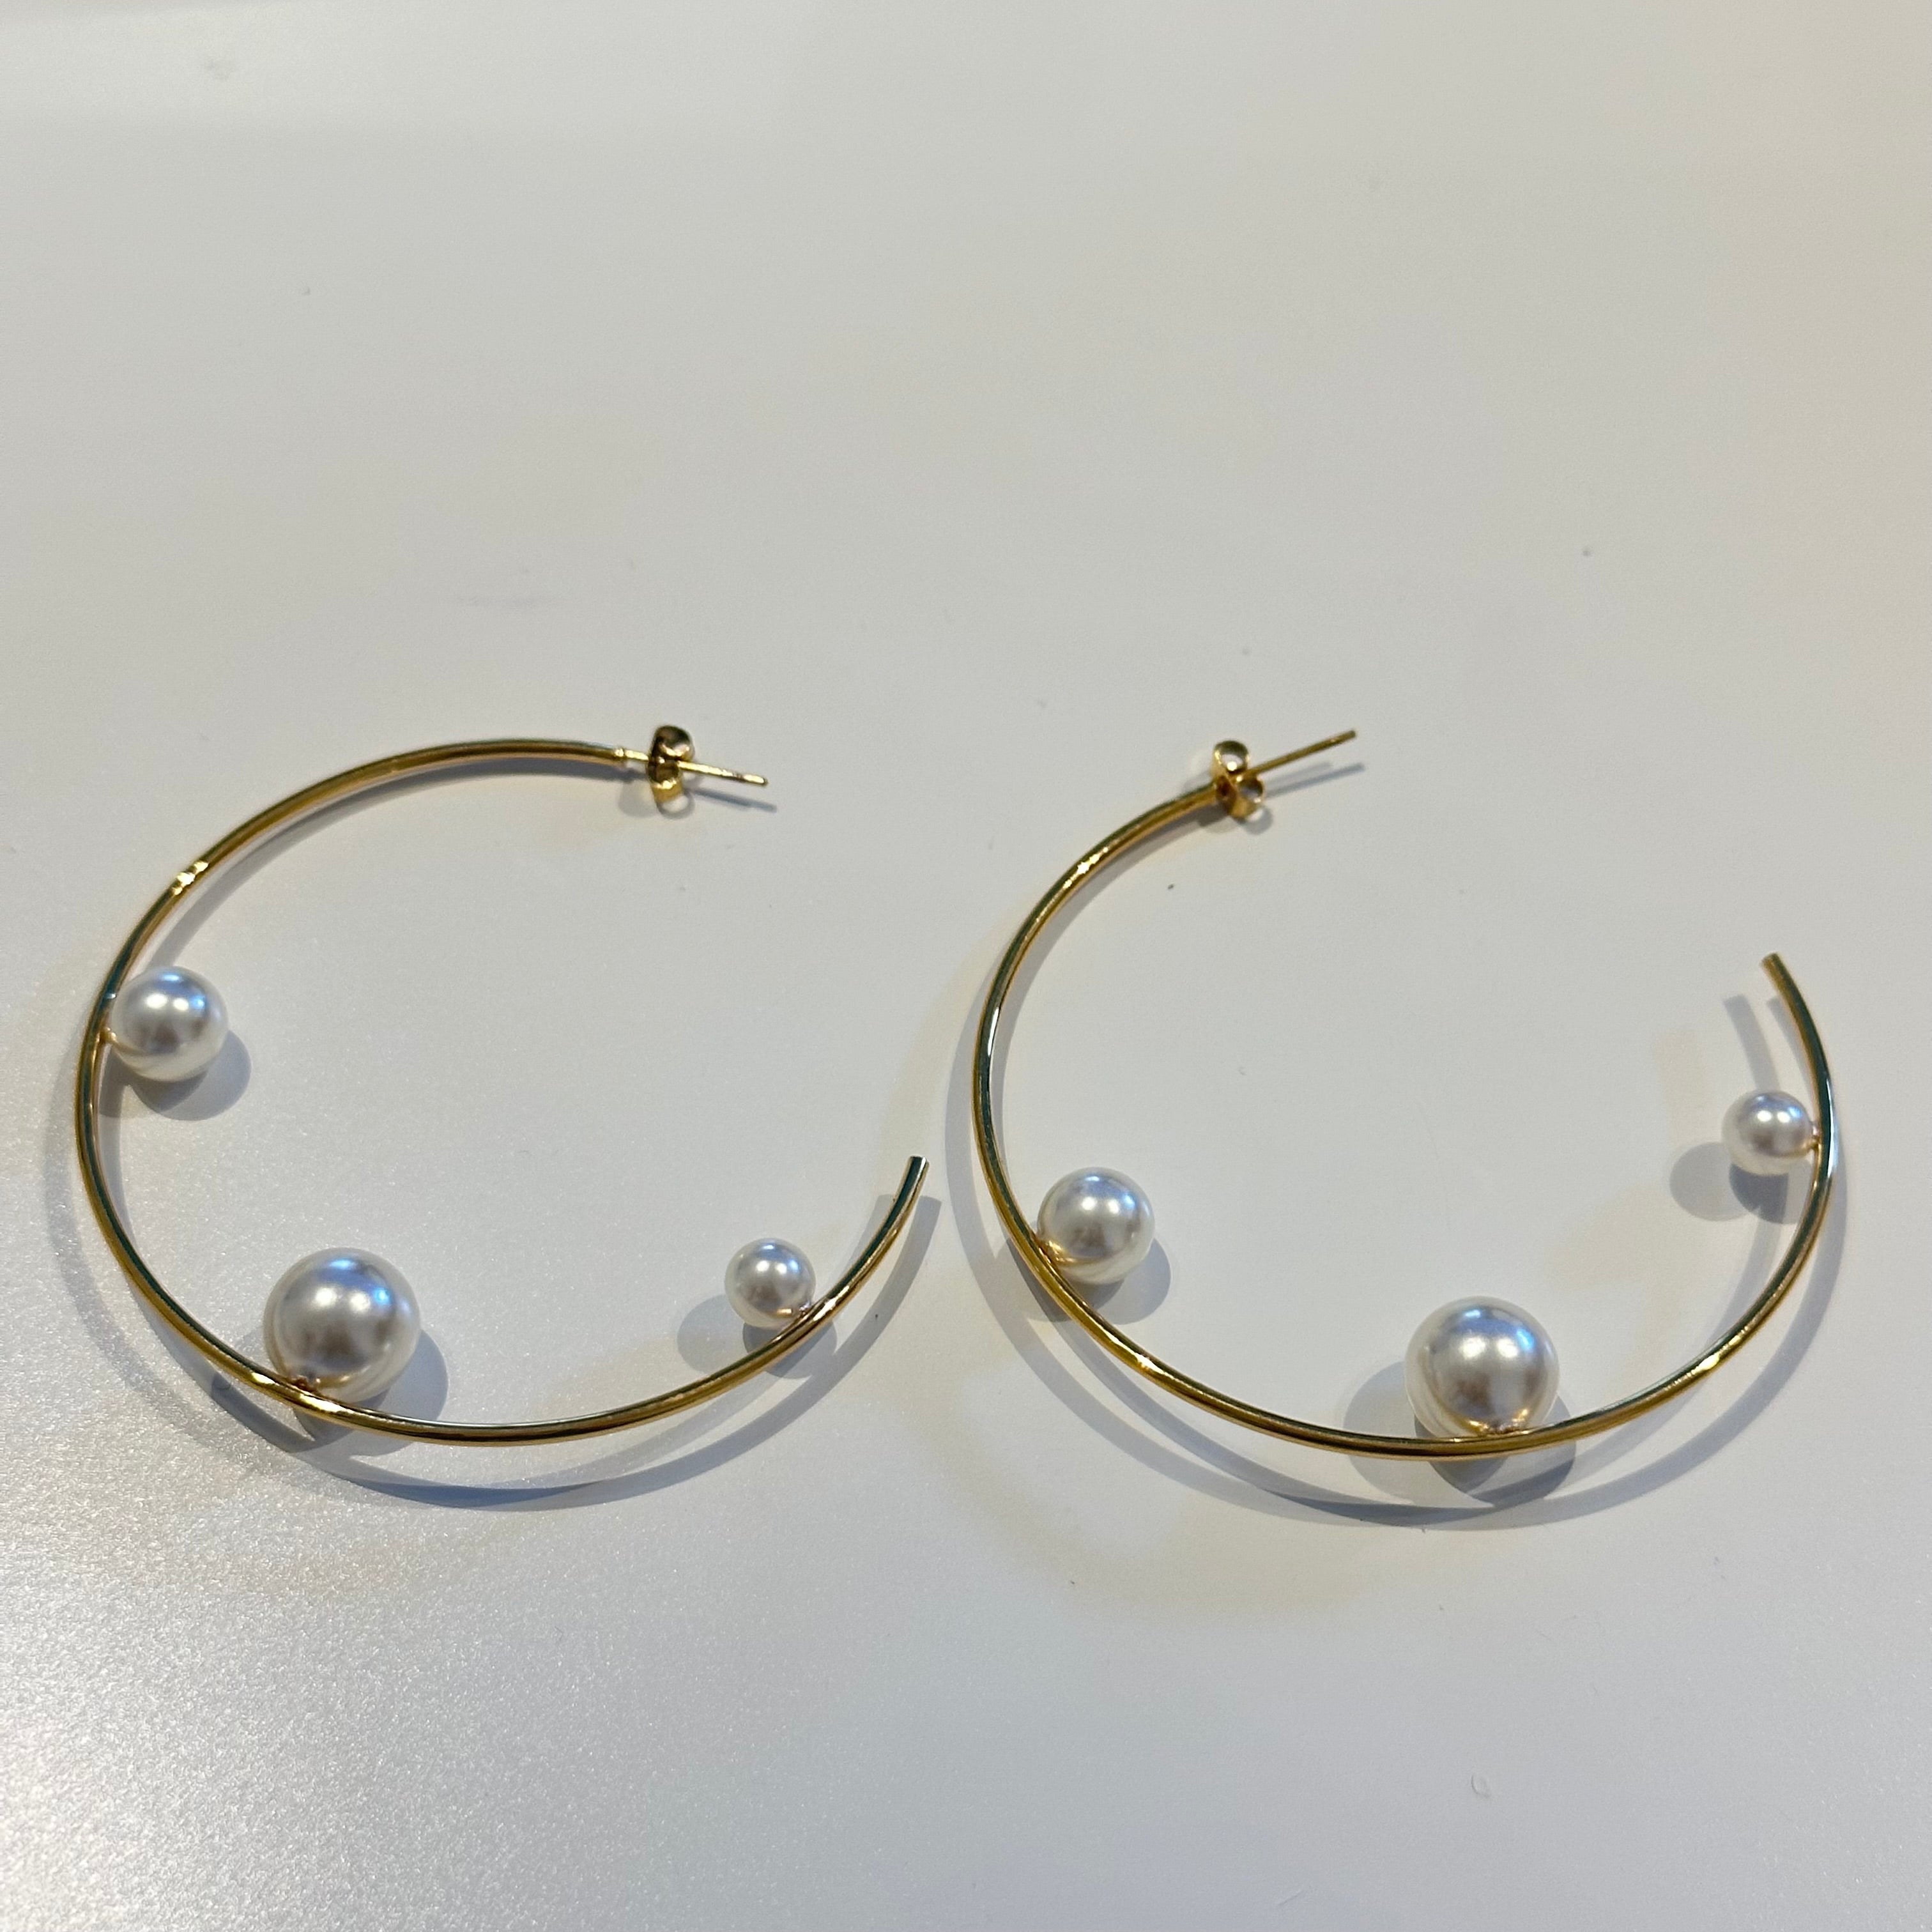 Large Rounded Hoops with Pearls Earring in 18k Gold Plated Brass - The Maleeka Earrings